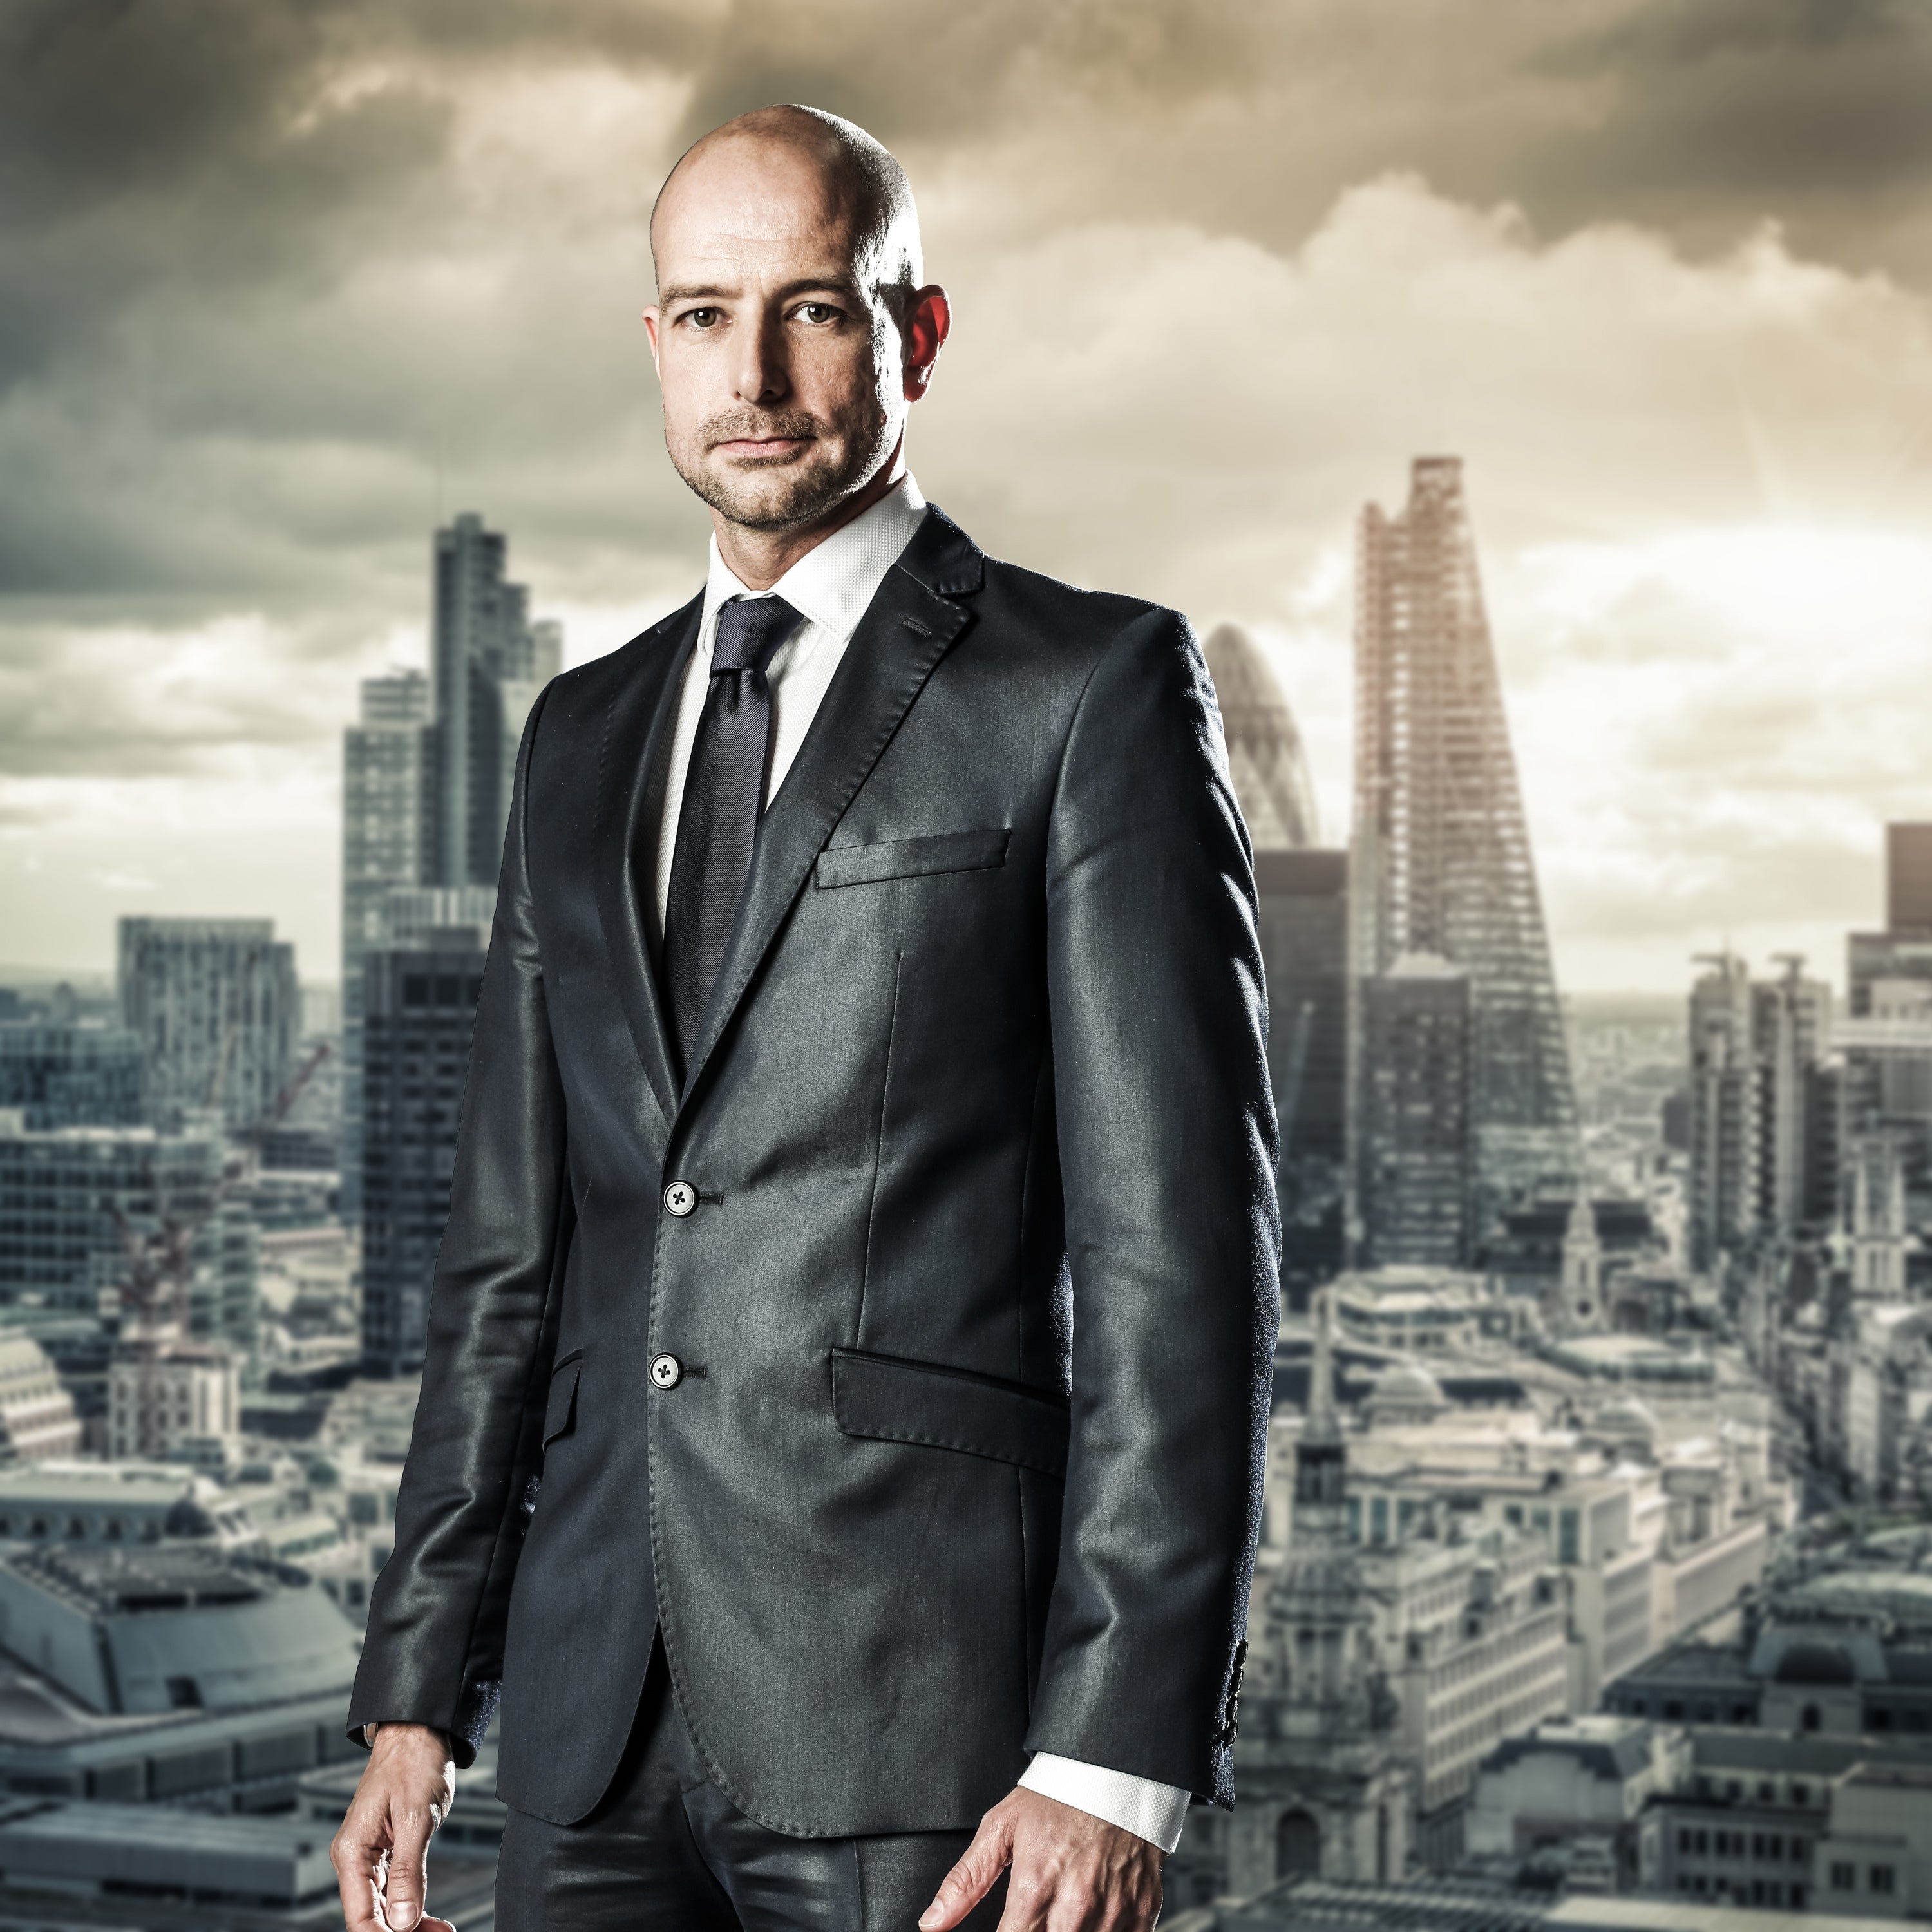 The Apprentice candidate Chiles Cartwright